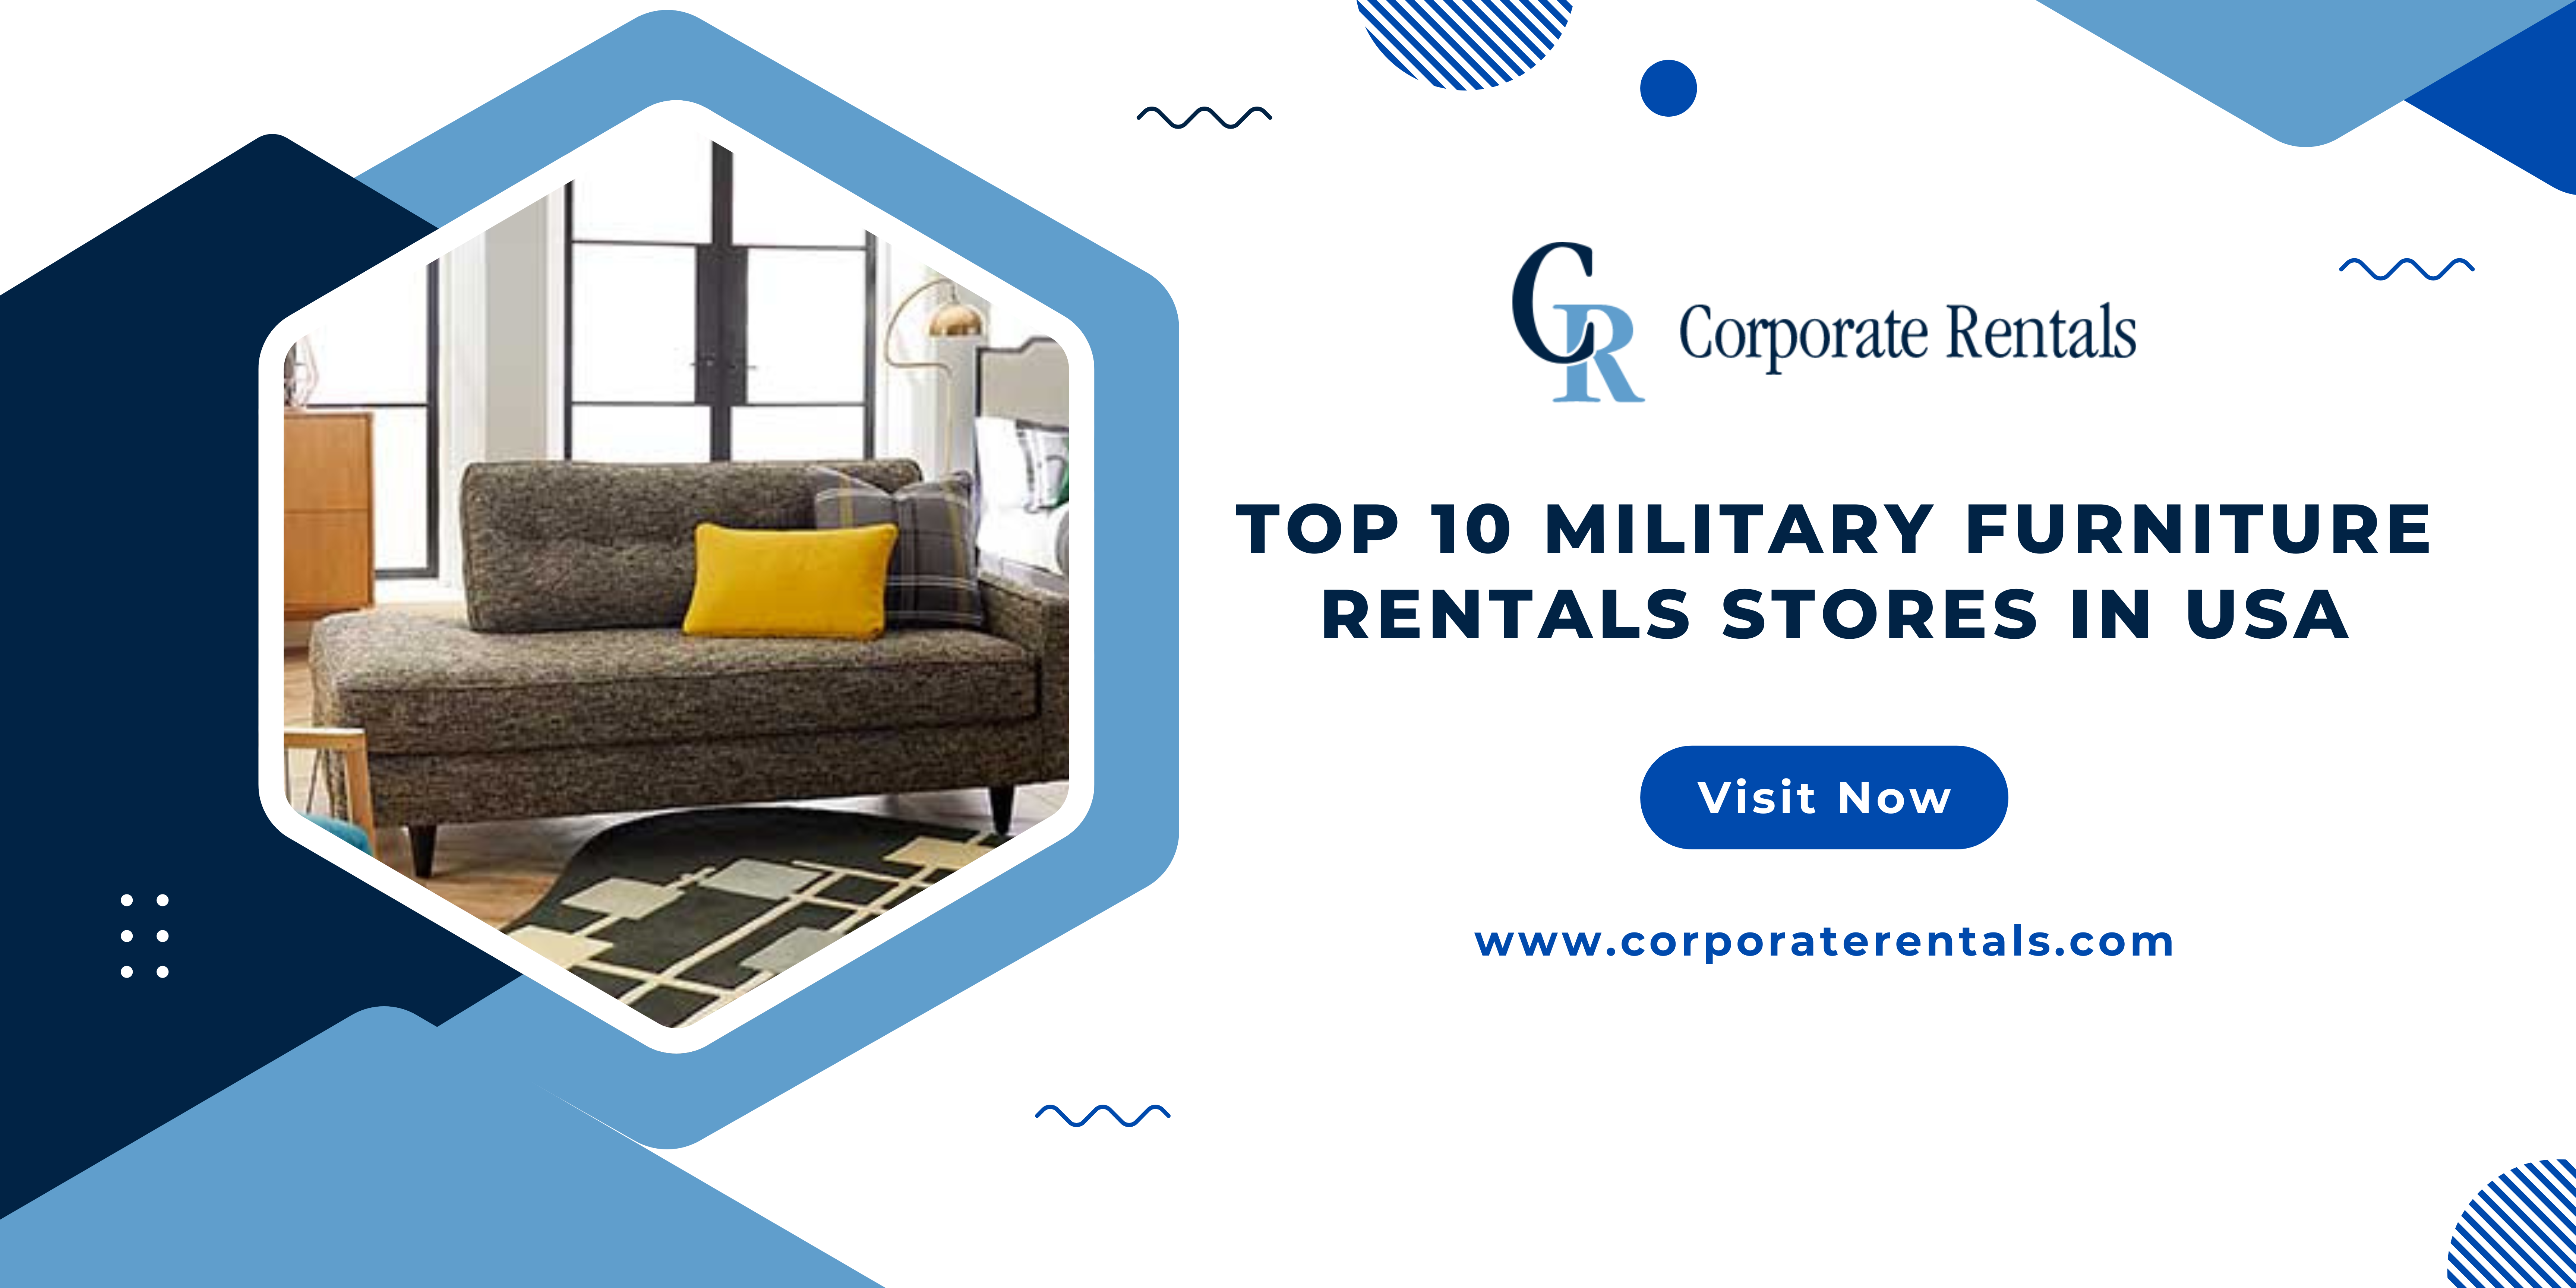 Top 10 Military Furniture Rentals Stores in USA